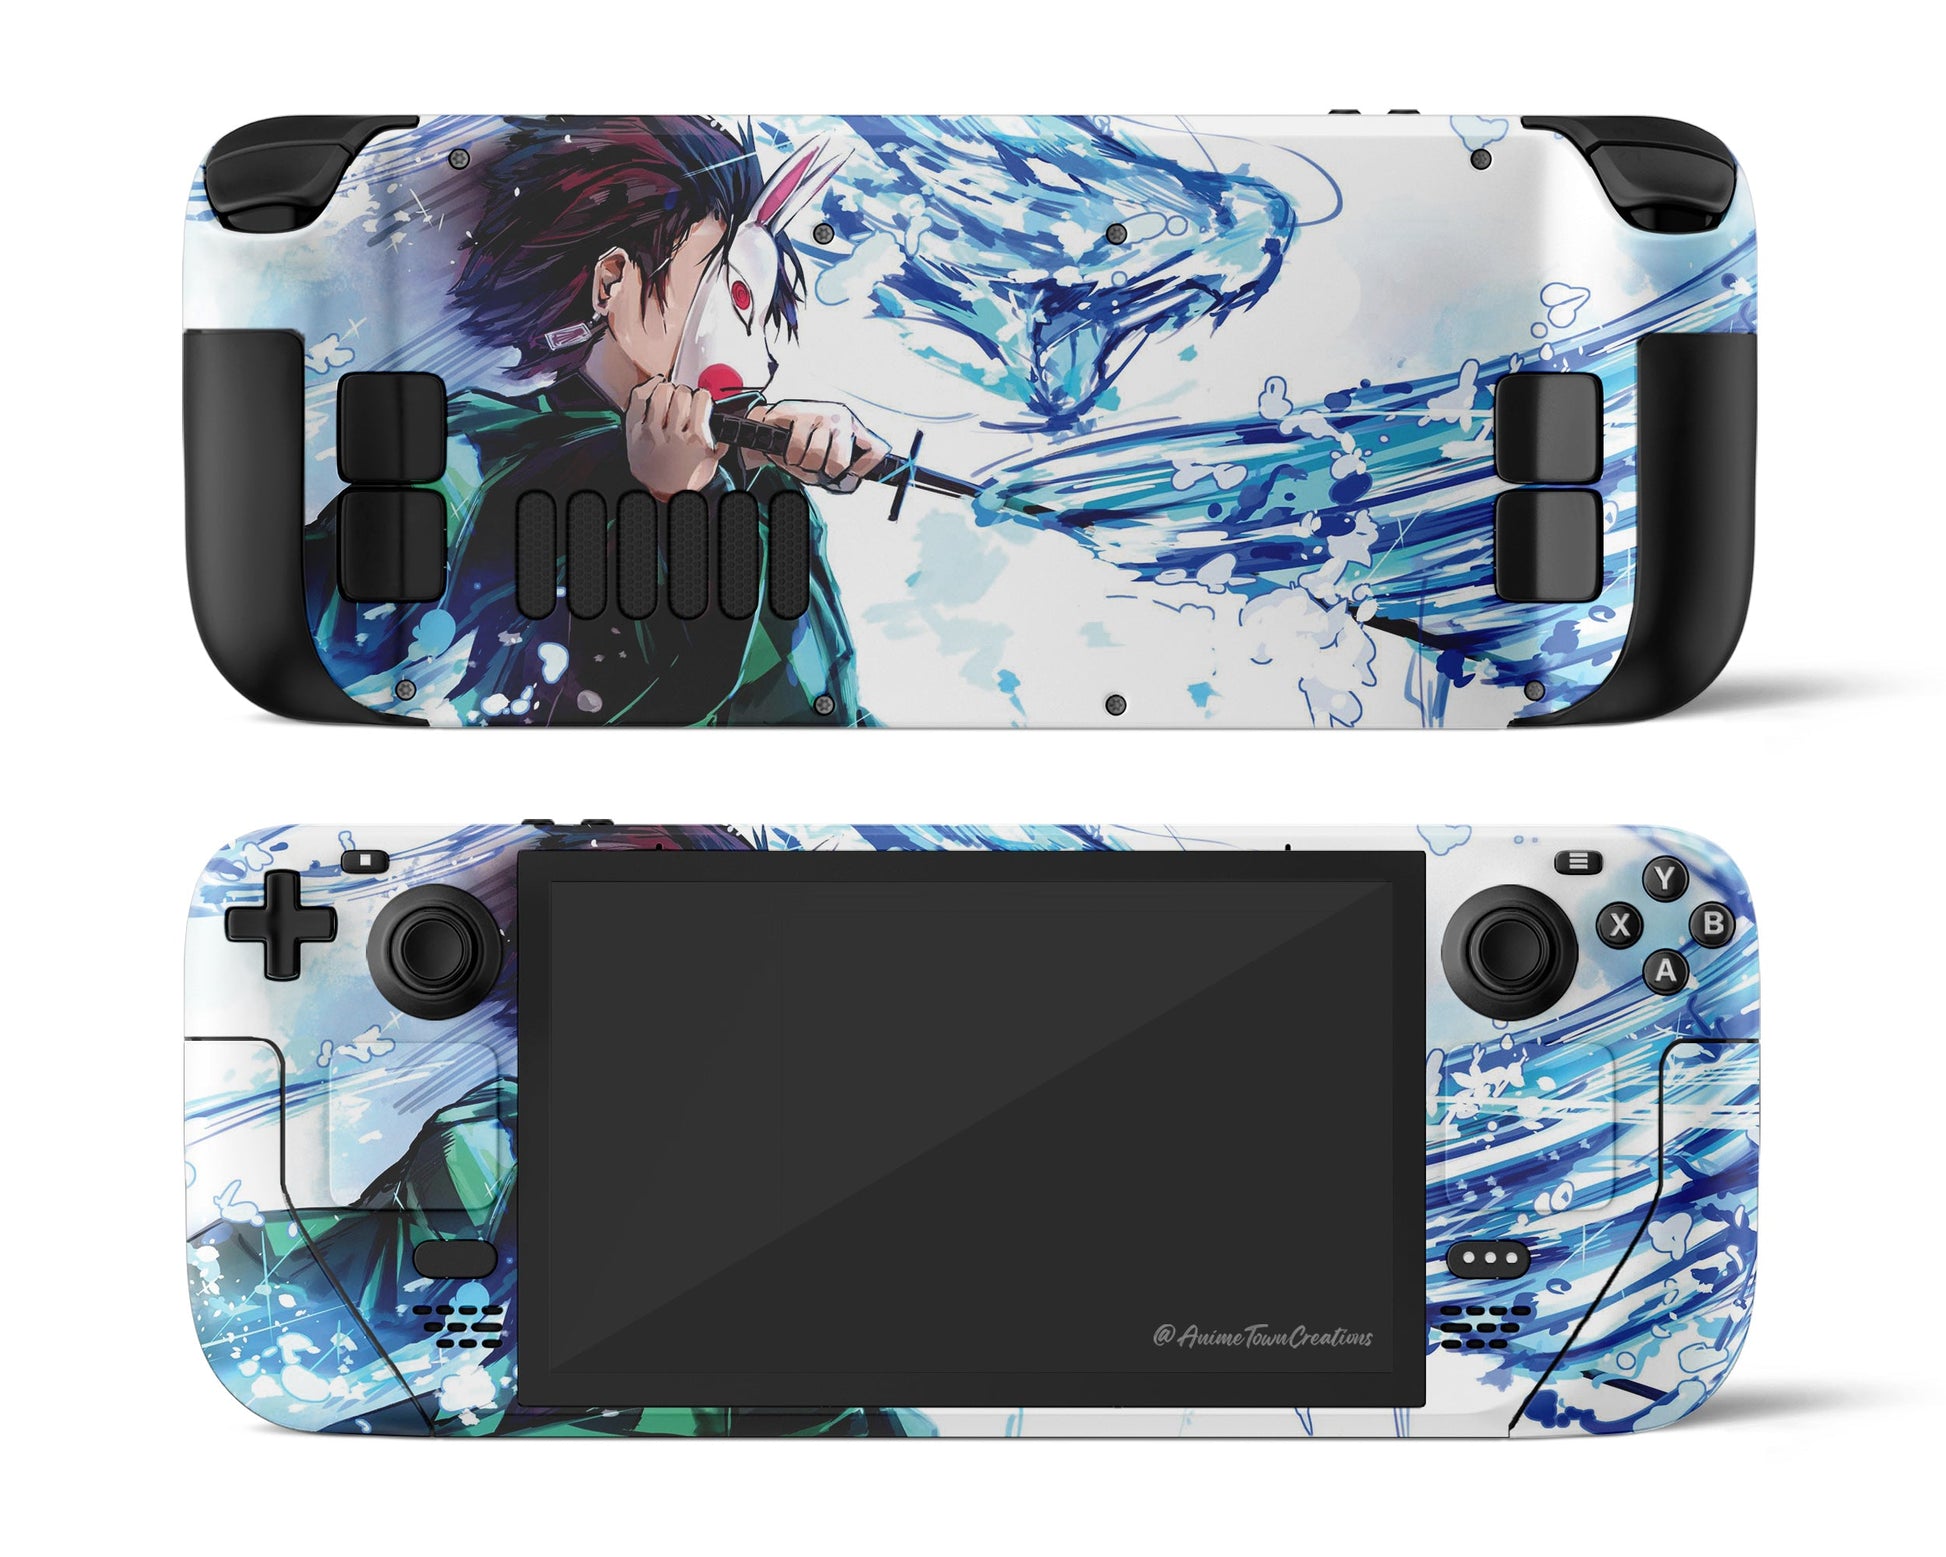 Anime Town Creations Steam Deck Demon Slayer Tanjiro Water Breathing Style Vinyl only Skins - Anime Demon Slayer Steam Deck Skin